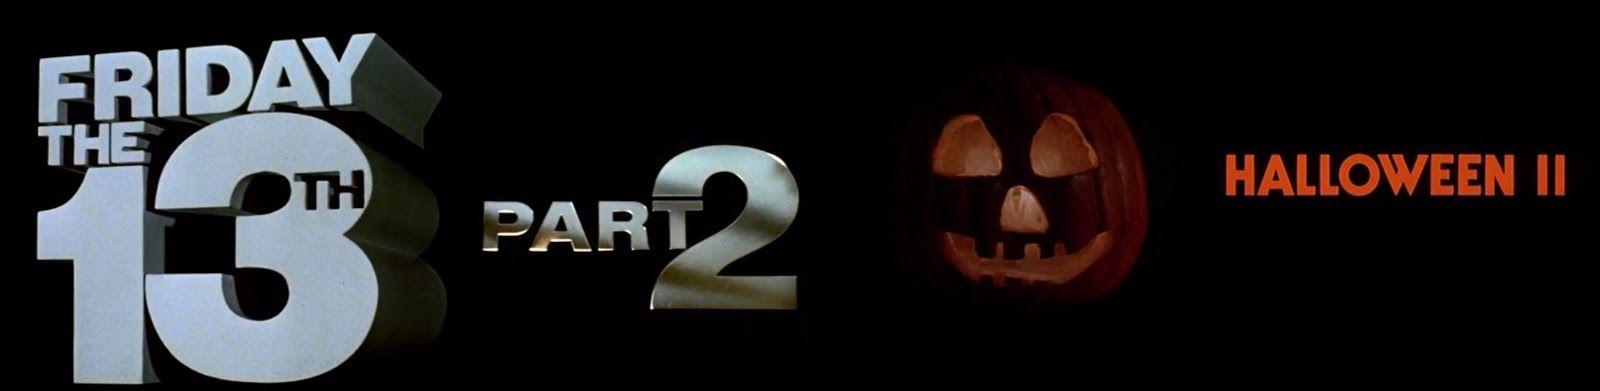 Friday the 13th Part 2 Logo - Competing Film Showdown: COMPETING FILM SHOWDOWN - Friday the 13th ...